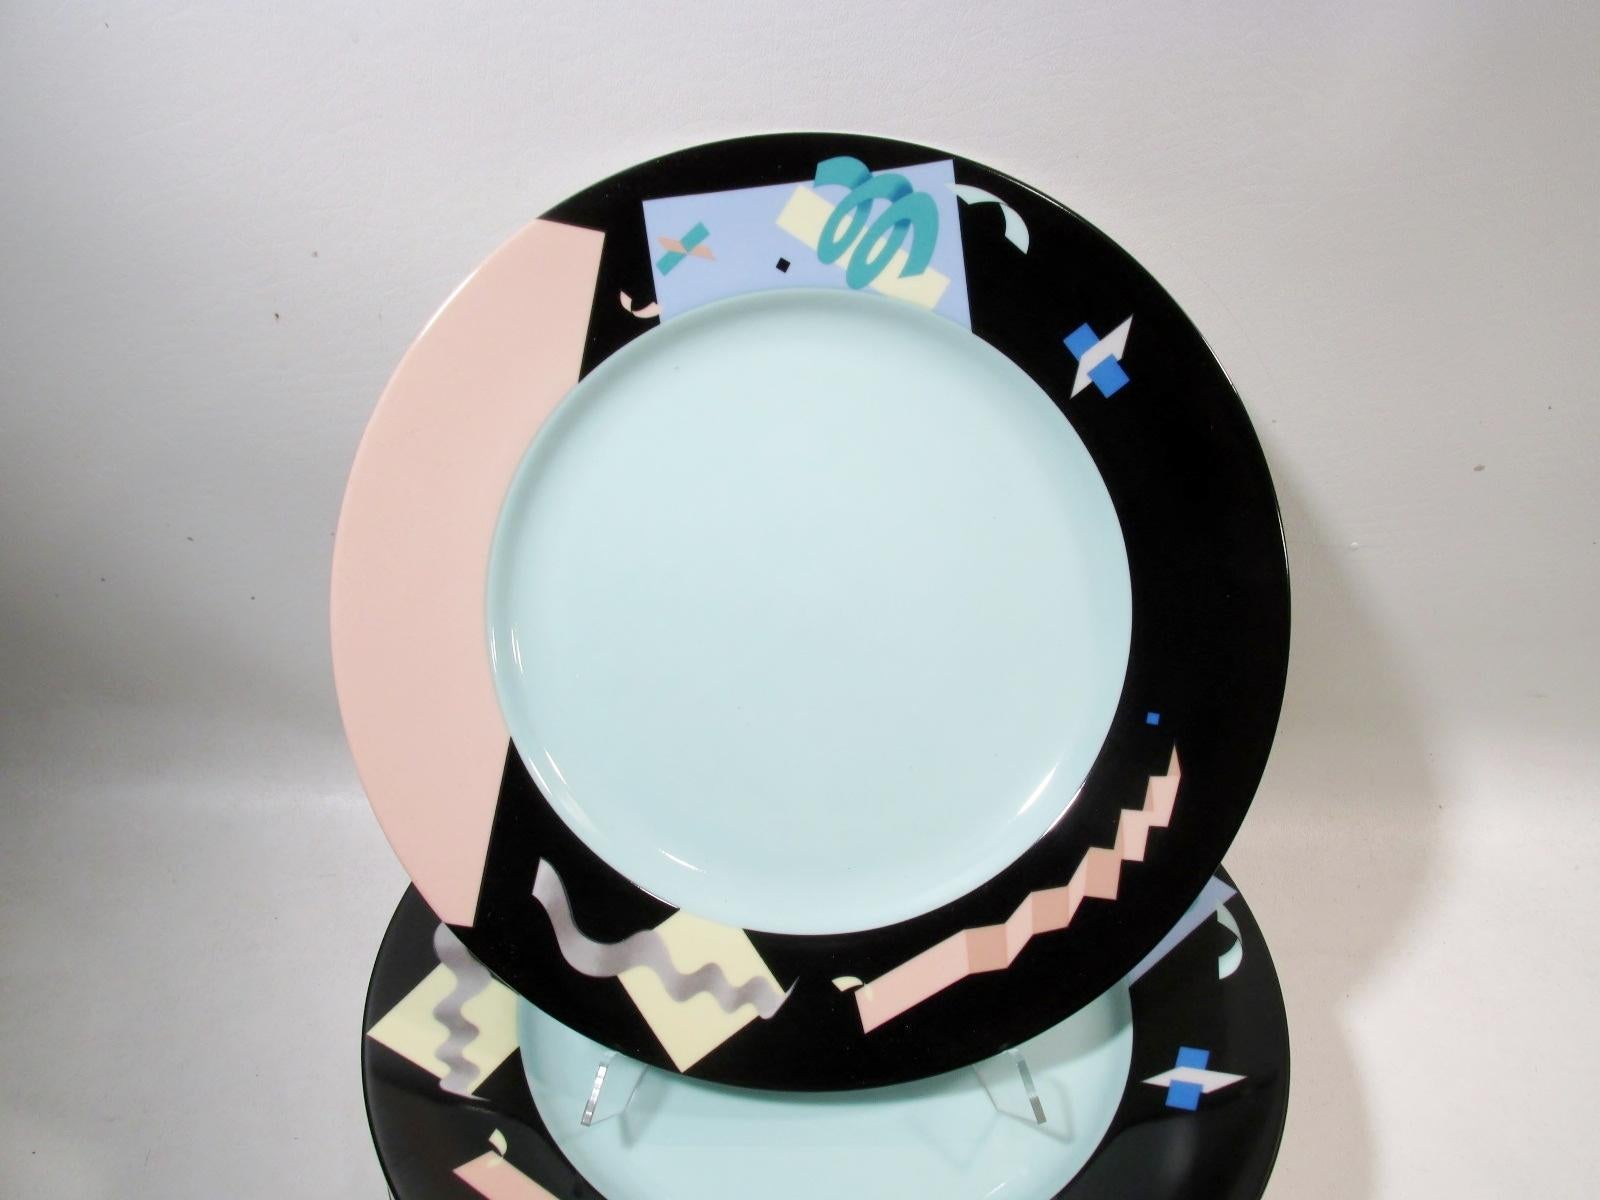 Set of 8 - 12” diameter service plates or chargers. From a renowned 1980s series of architect and prominent designer commissioned tableware designs in fine porcelain from Swid Powell. Designed by Steven Holl, the pattern is the Memphis movement